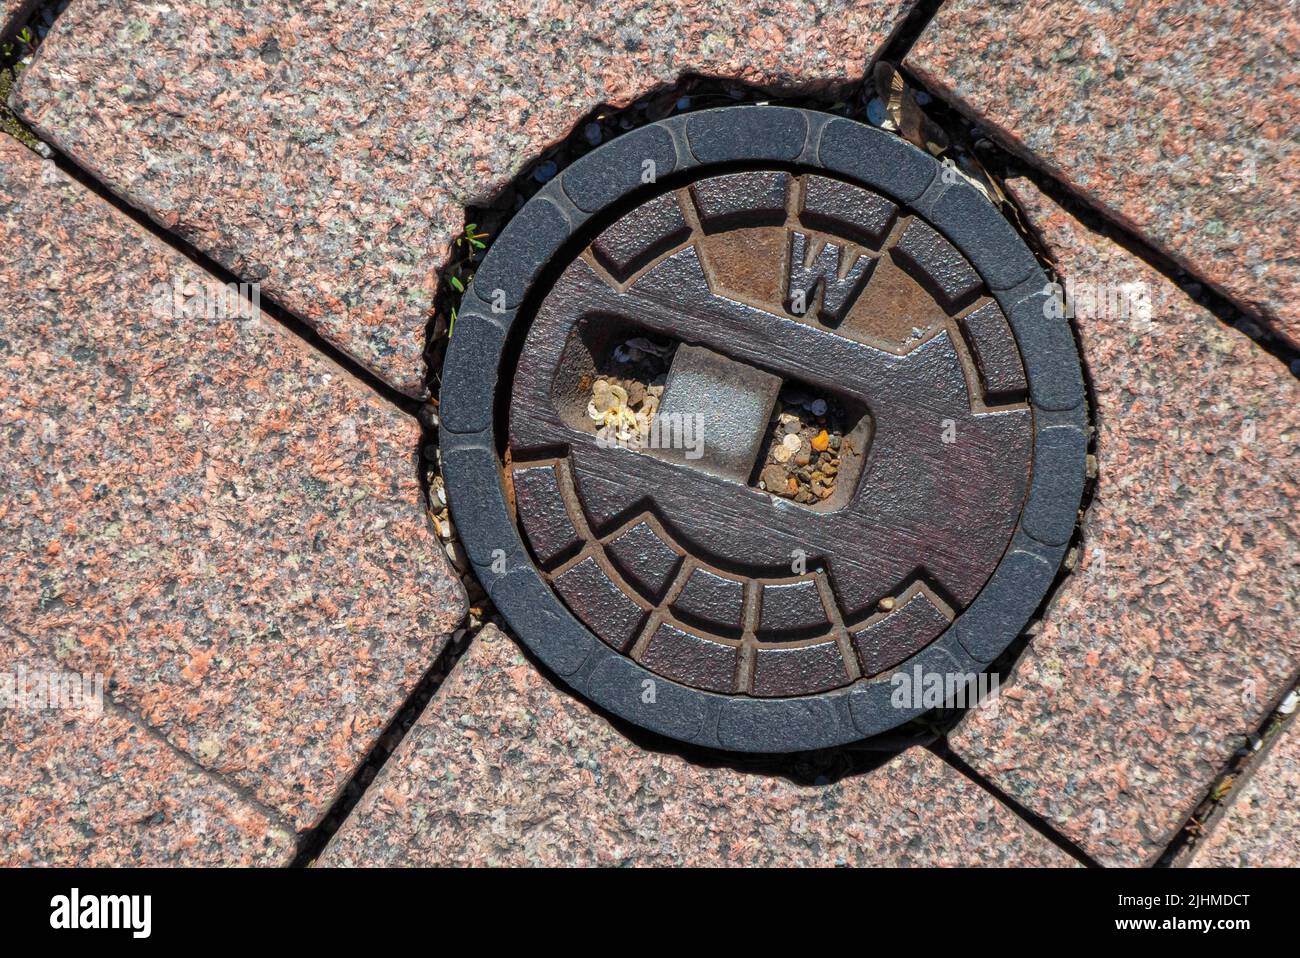 Street cap for municipal water supply with paving stones on a sidewalk in germany Stock Photo